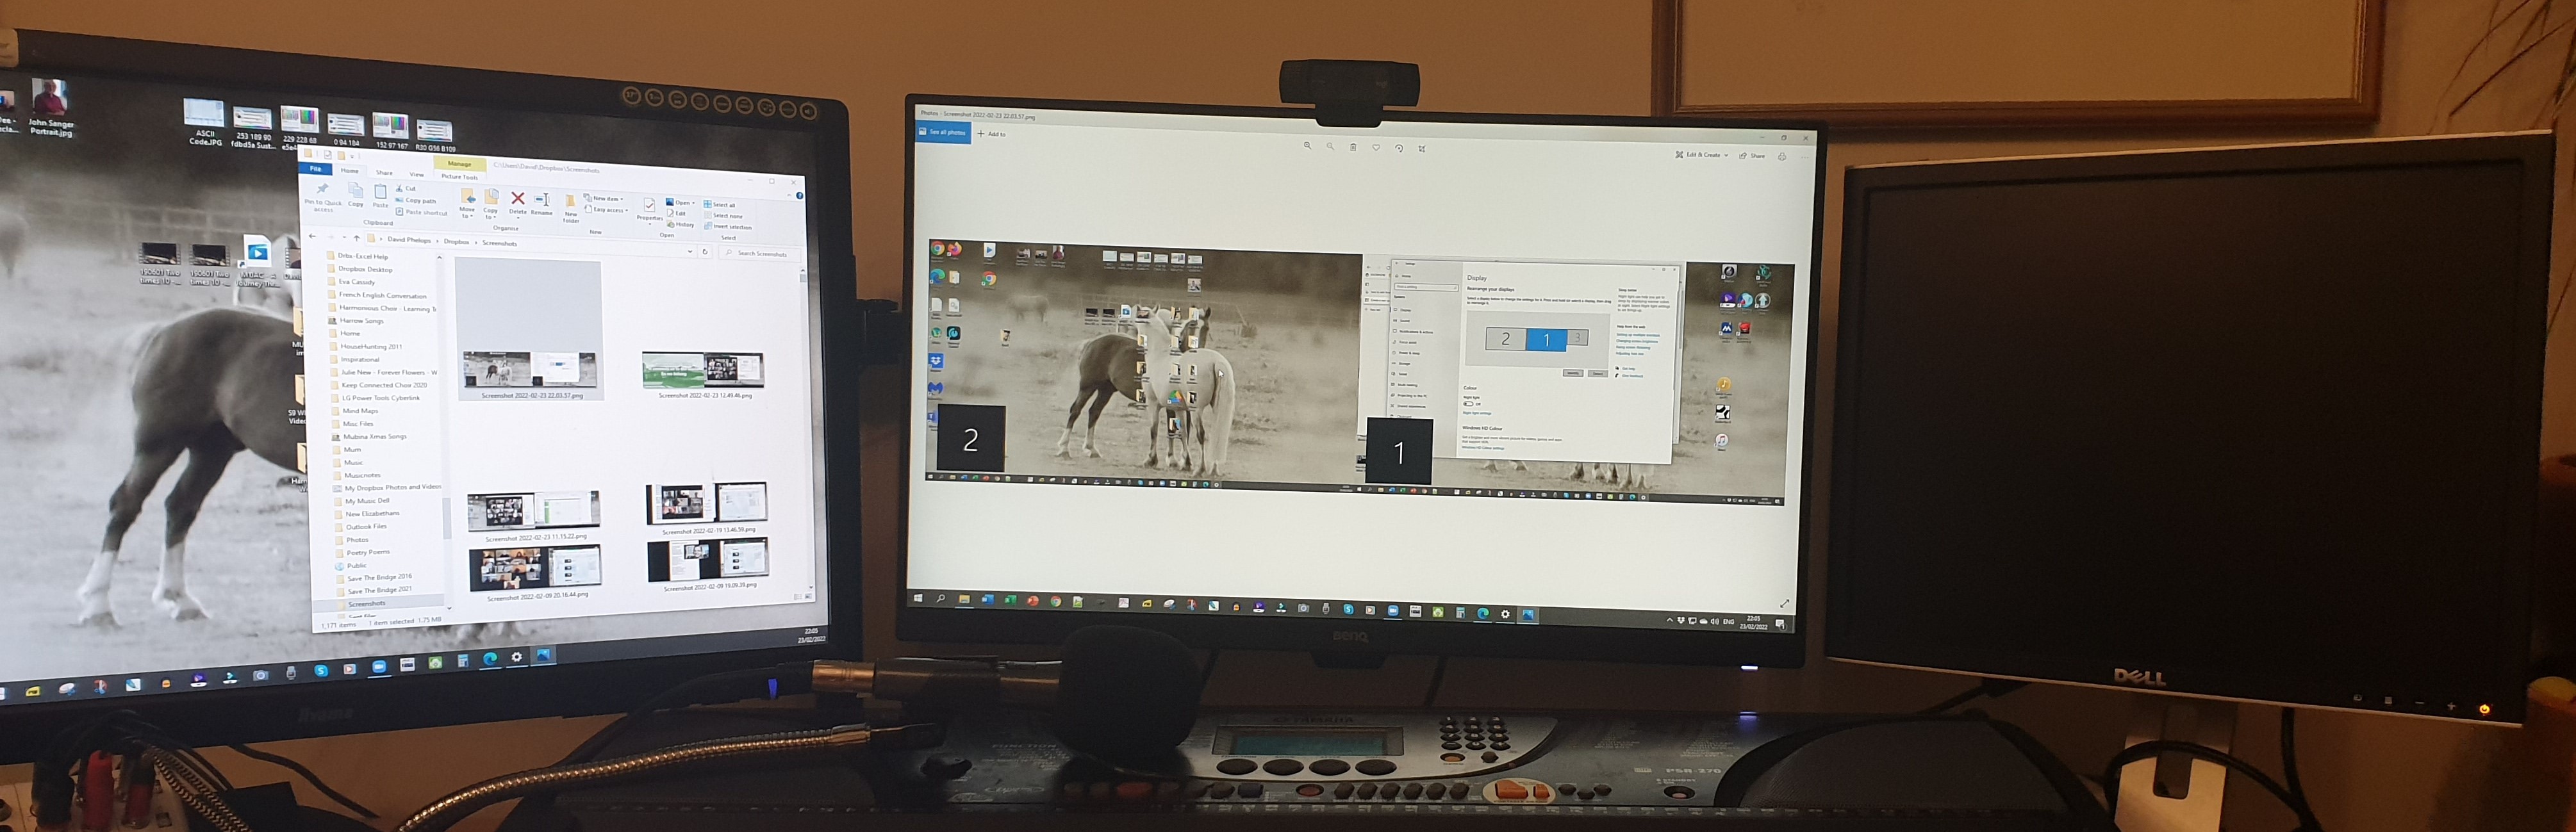 How Many Monitors Will Windows 10 Support  